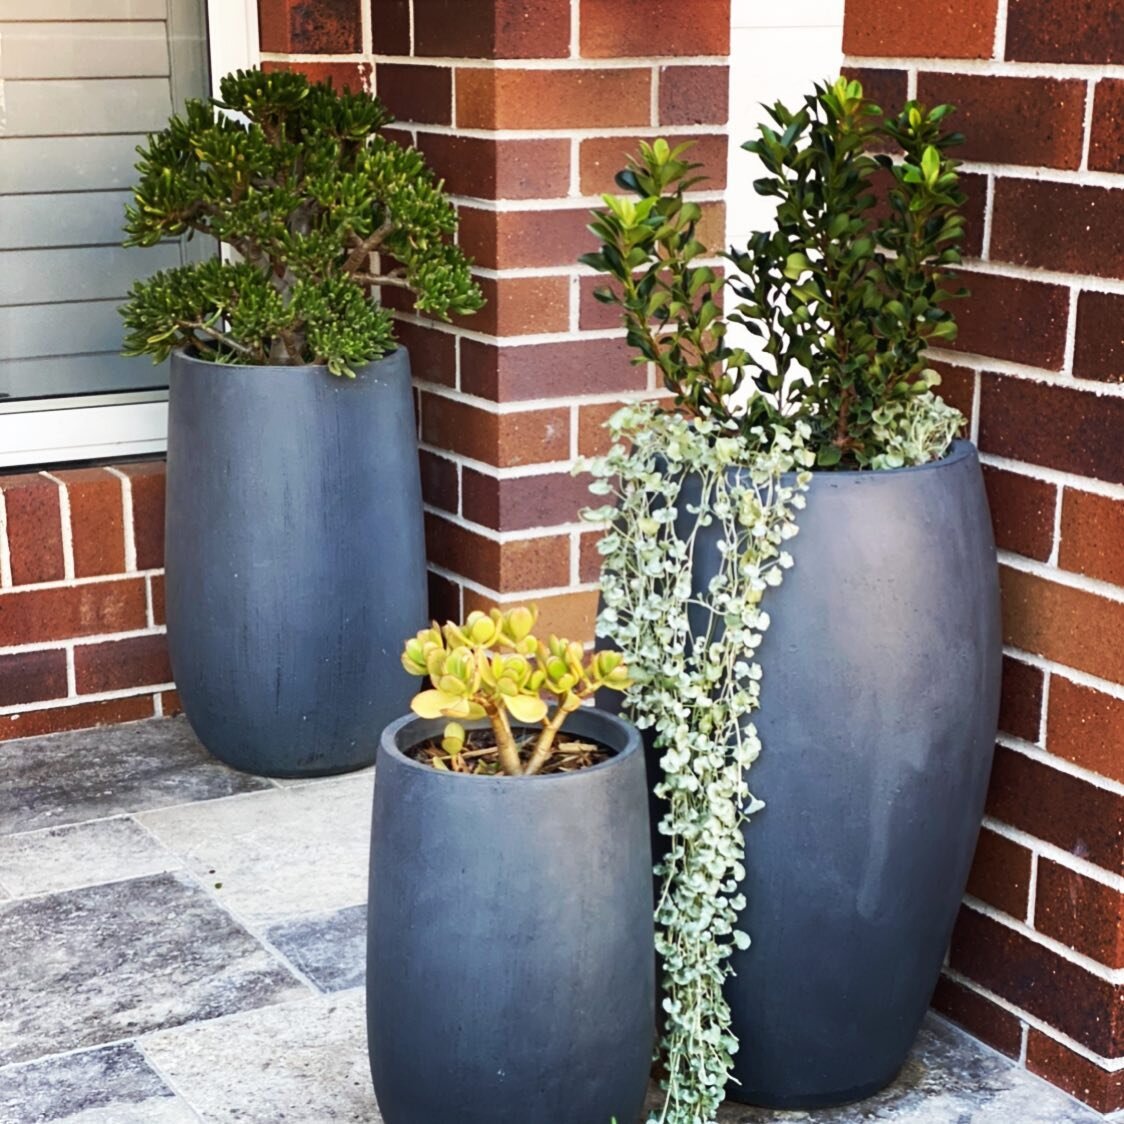 Different sized pots in odd numbers always compliments the overall look of balconies and front entrances #beyondthegate #beyondthegatelandscaping #sydneylandscaper #softlandscaping #conceptdesign #featurepots